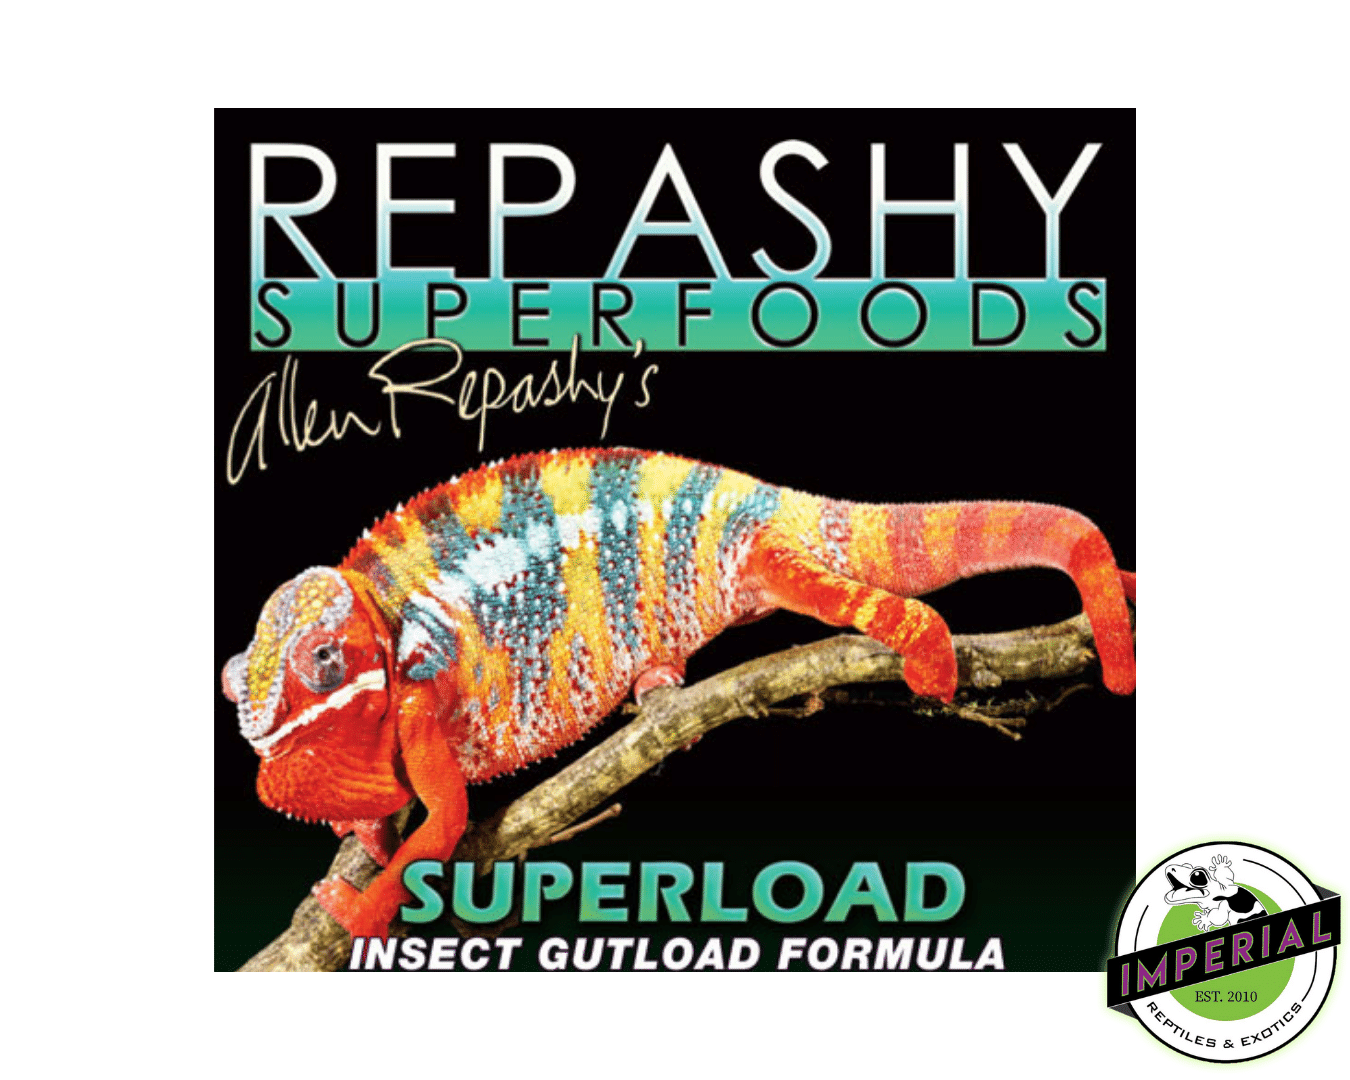 feeder insect gut loads for sale online, buy reptile supplies near me